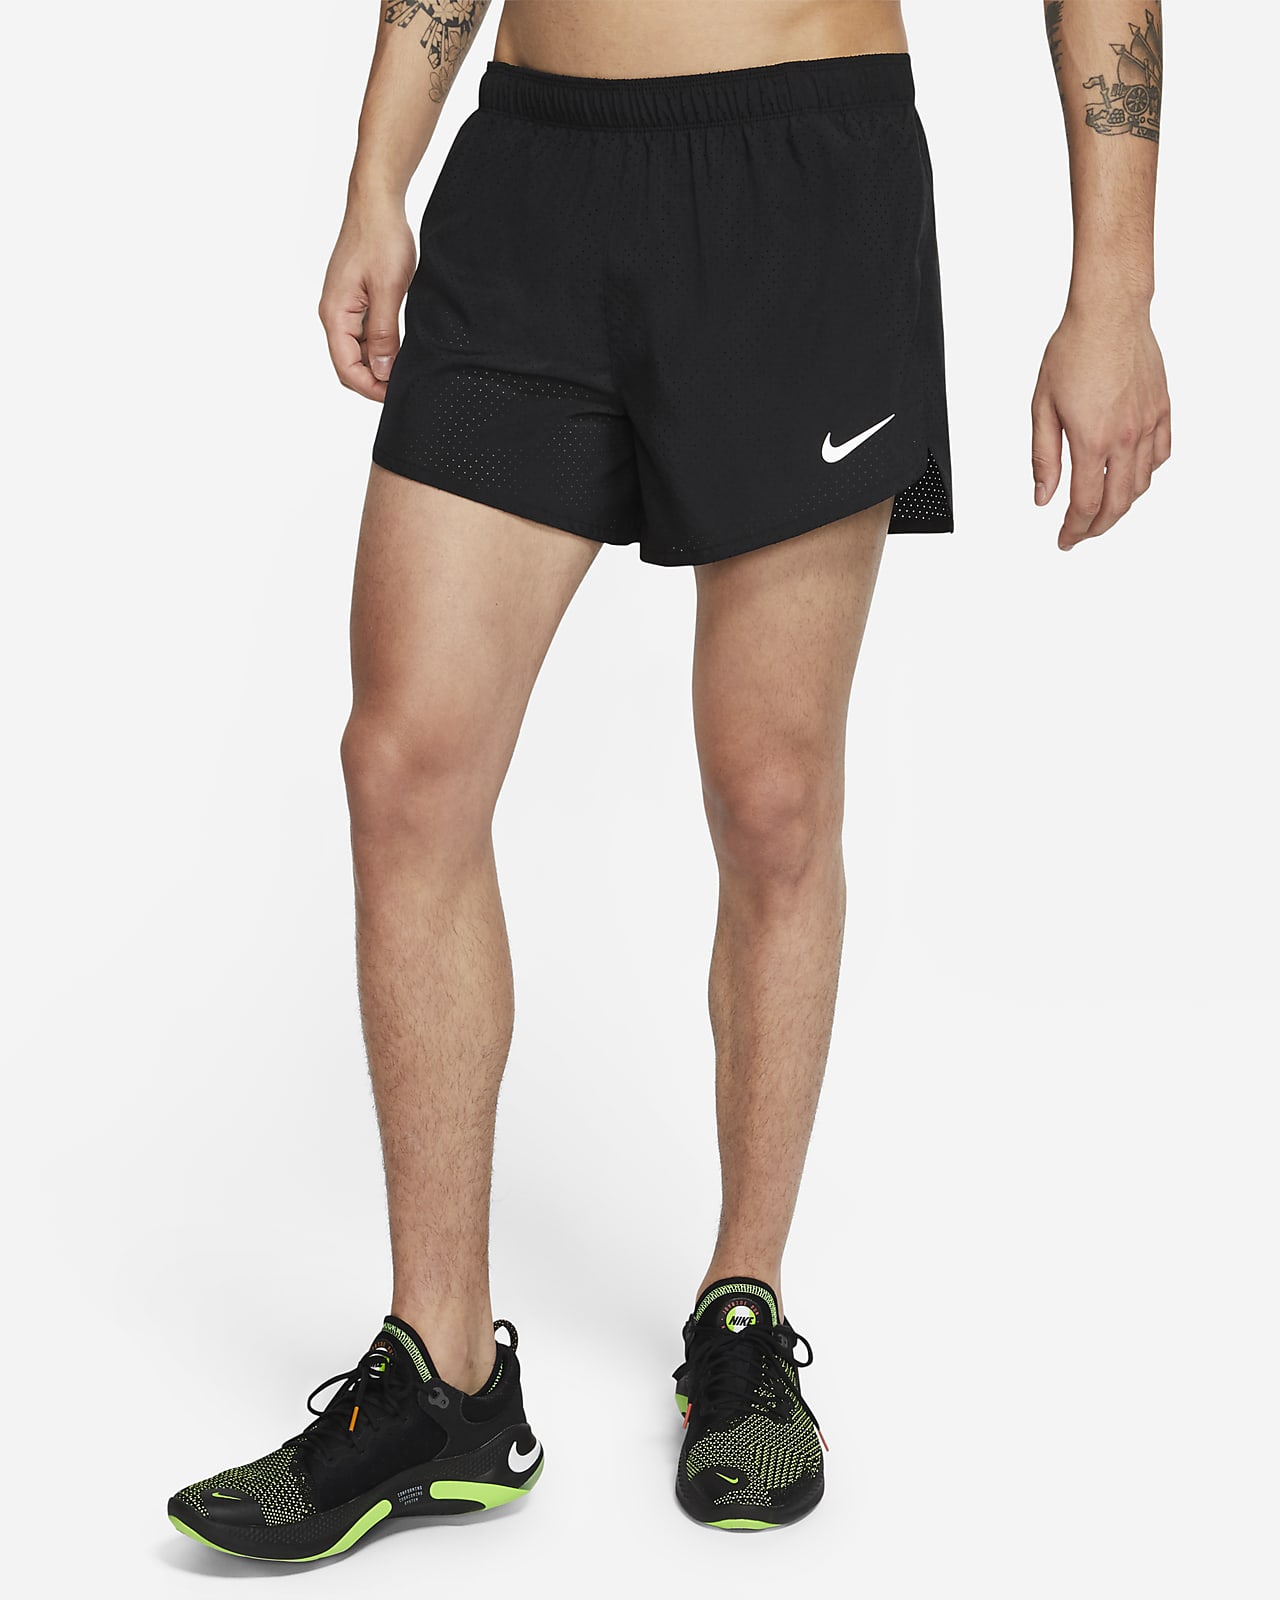 swear Station The beginning Nike Fast Men's 4" Lined Racing Shorts. Nike.com